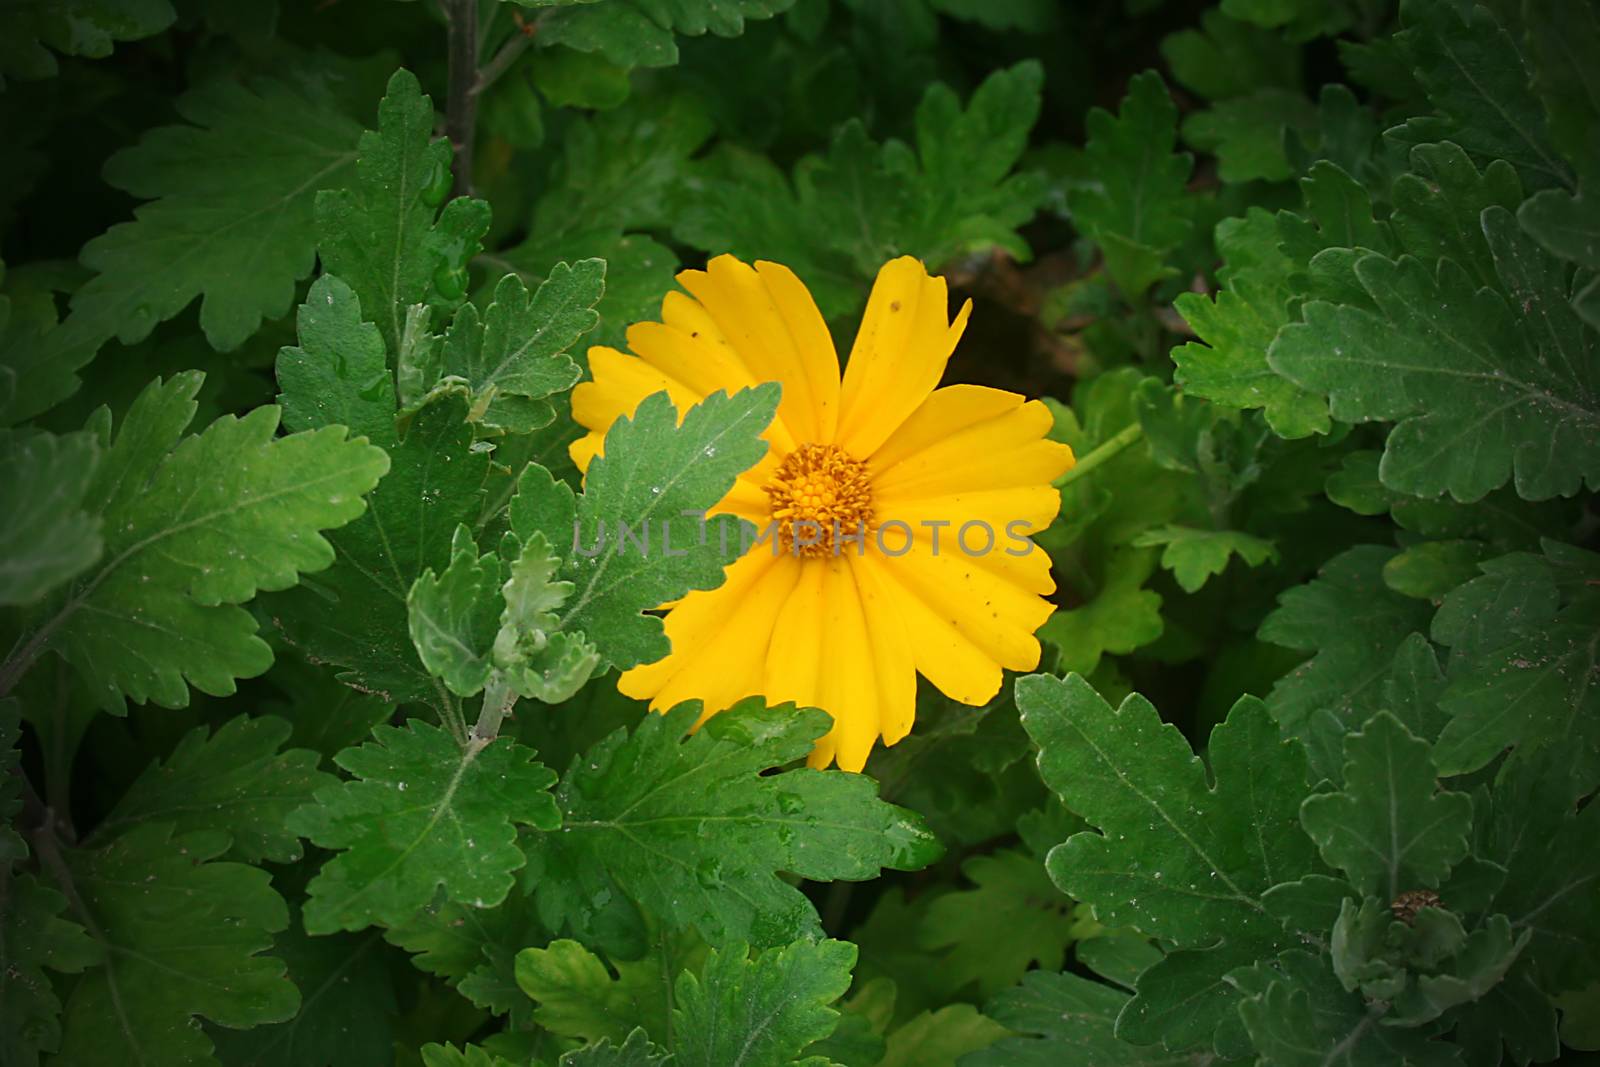 Yellow daisies in the summer garden by VIPDesignUSA